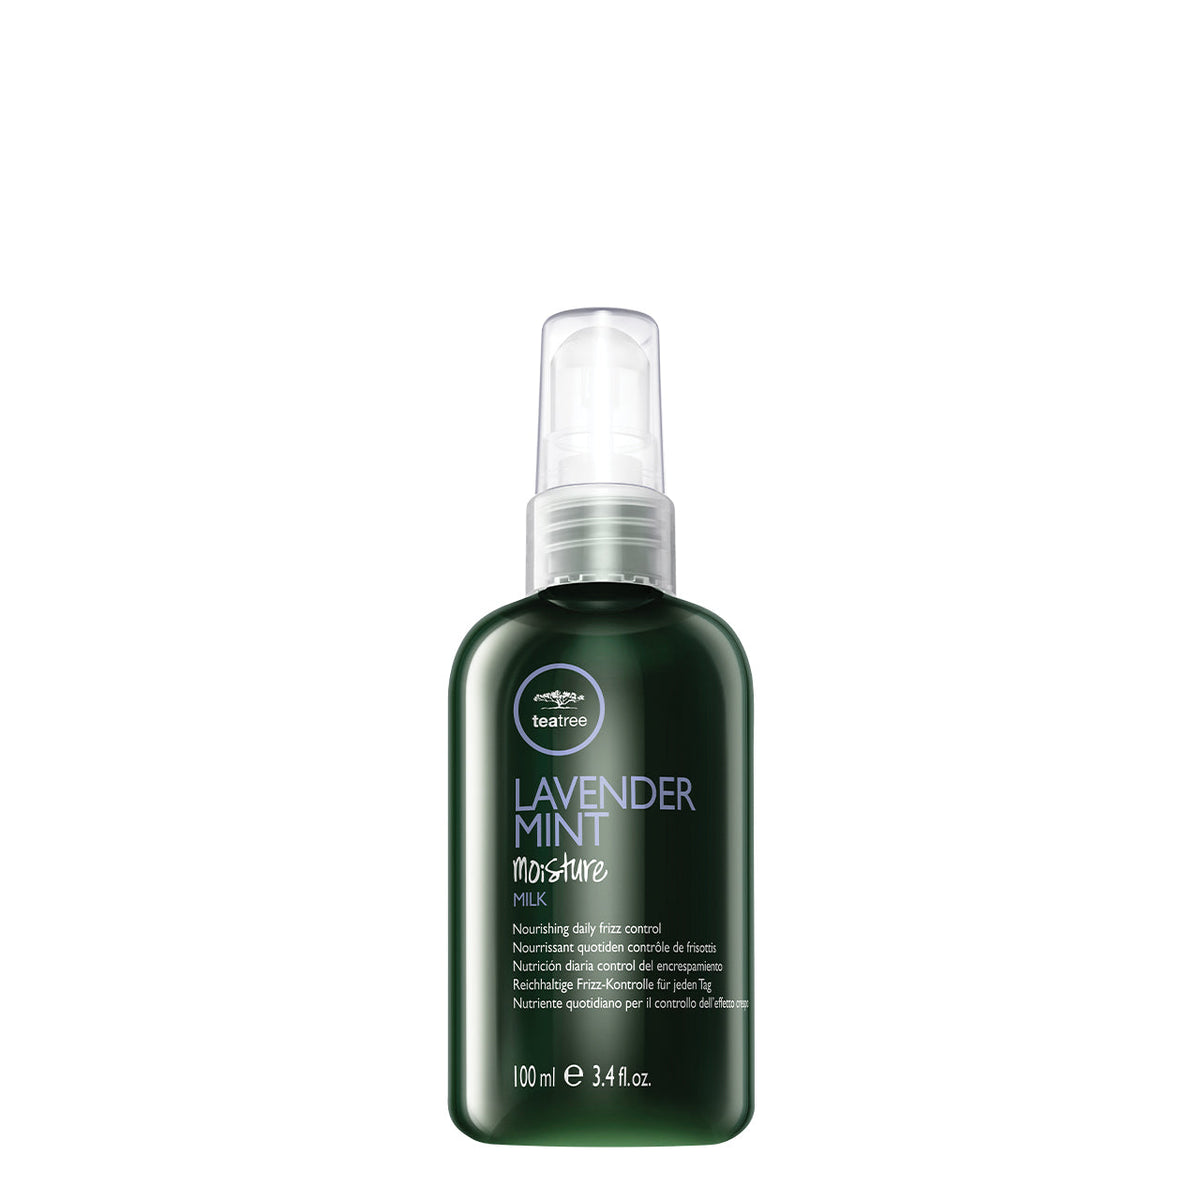 Tea Tree Lavender Mint Moisture Milk Leave-In Conditioner - by Paul Mitchell |ProCare Outlet|